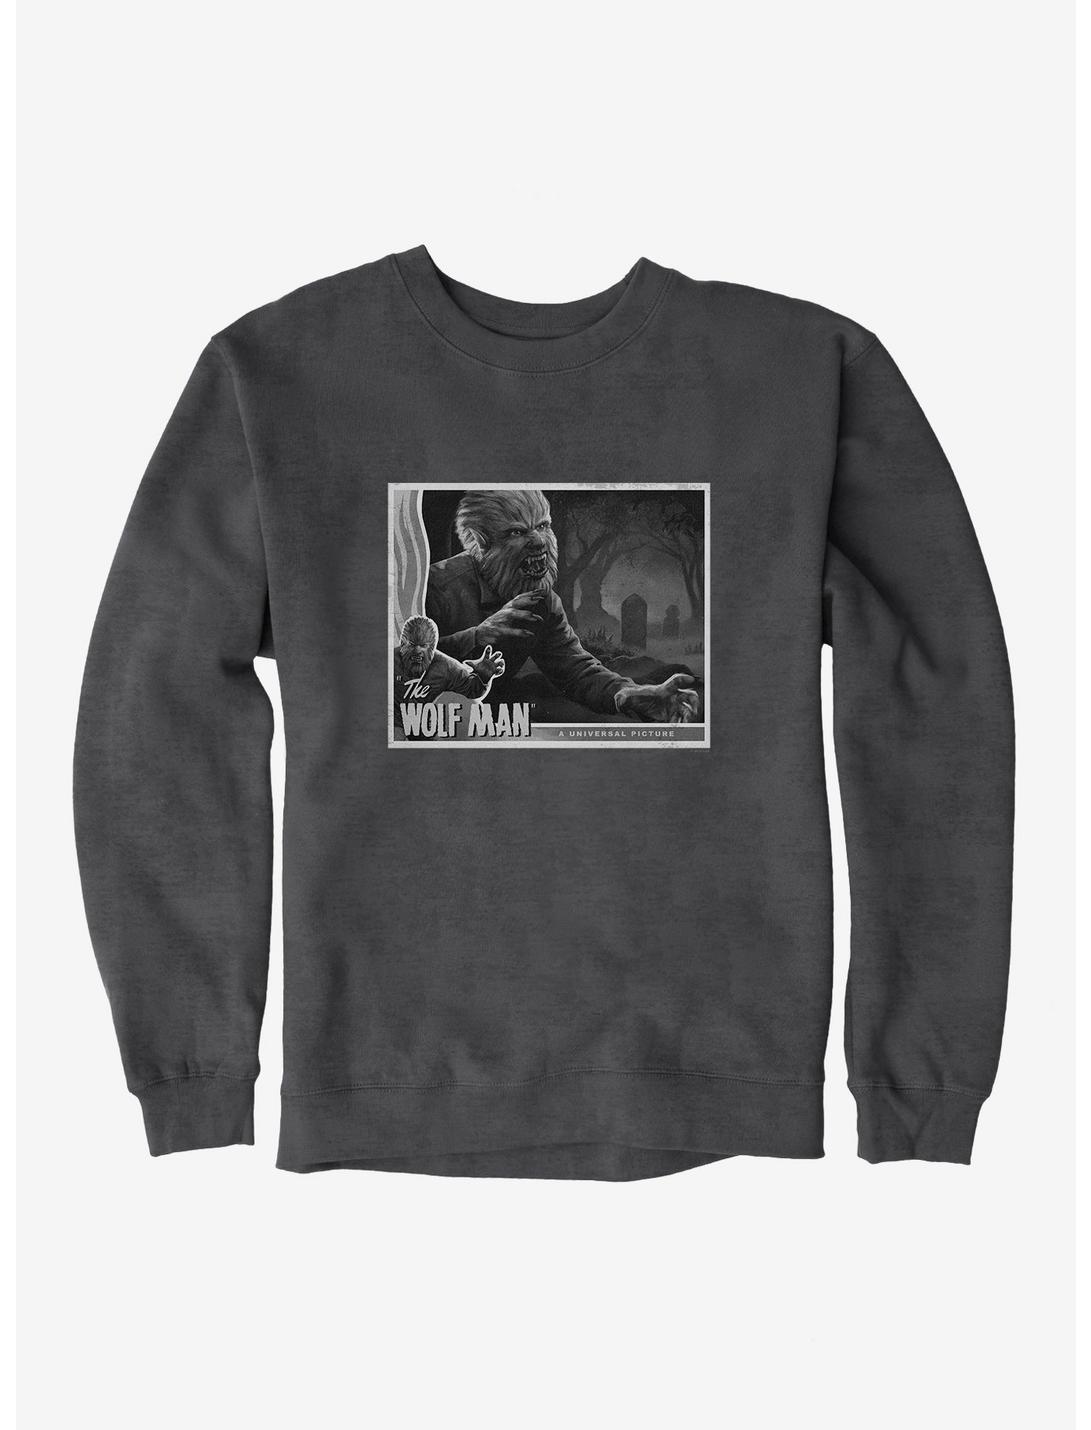 The Wolf Man Black And White Movie Poster Sweatshirt, , hi-res